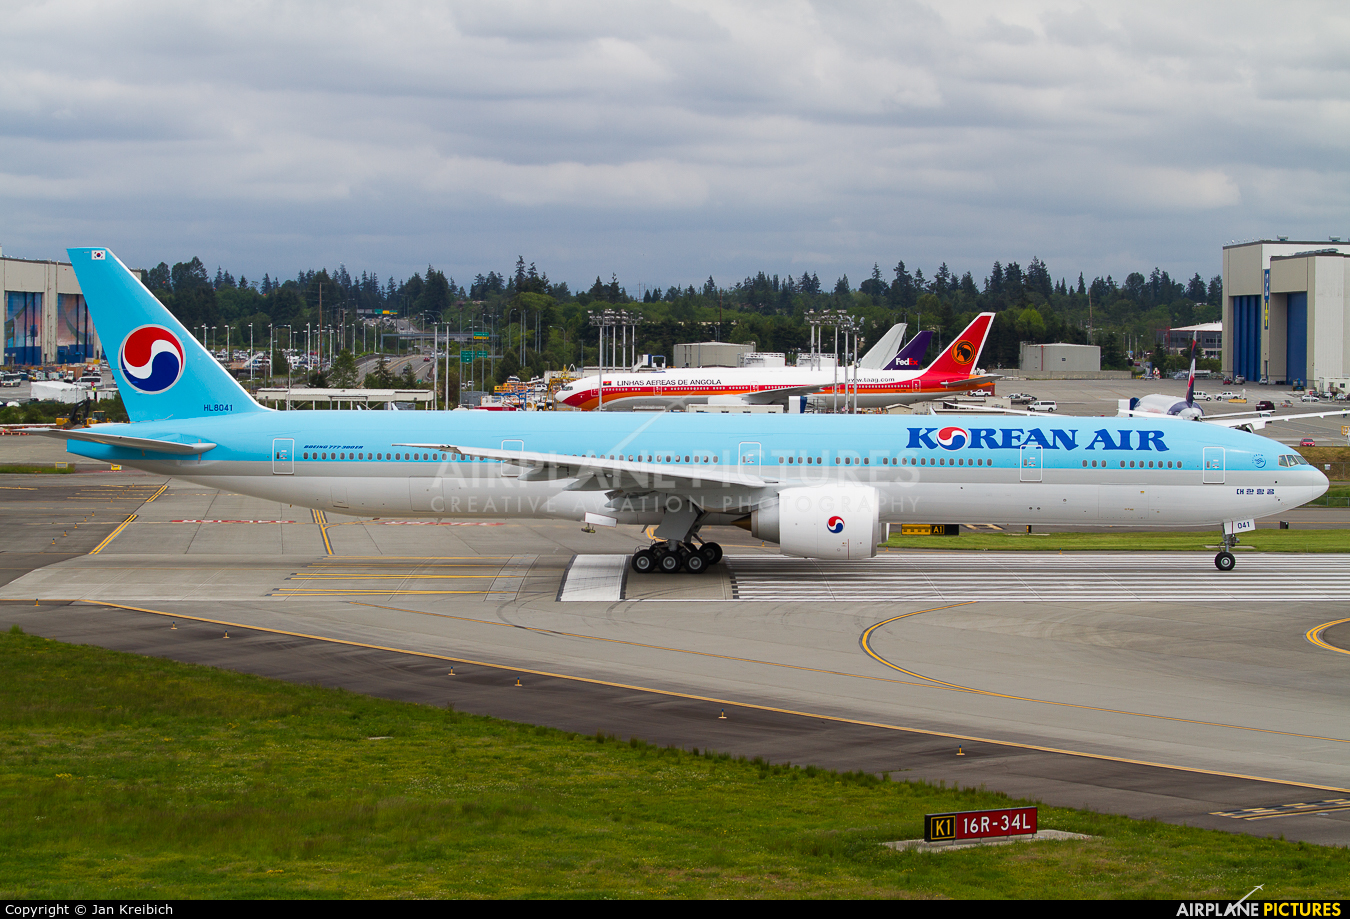 Korean Air HL8041 aircraft at Everett - Snohomish County / Paine Field